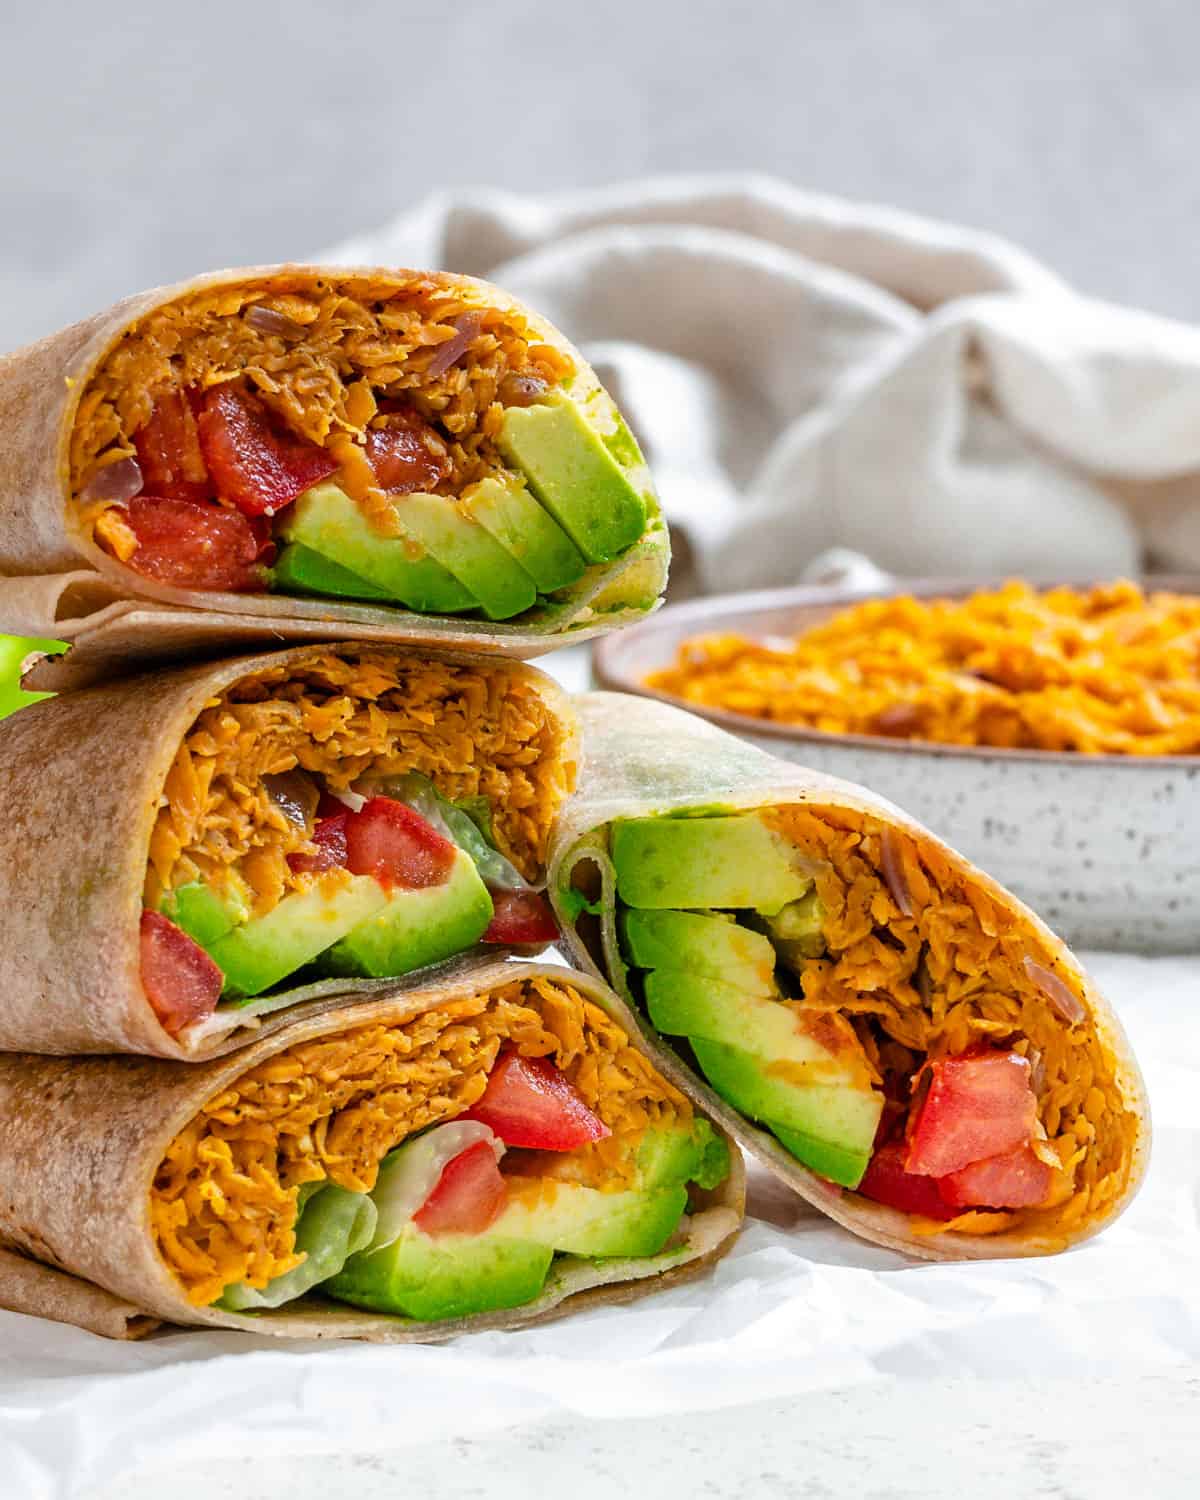 completed Sweet Potato Burritos stacked on one another against a light background